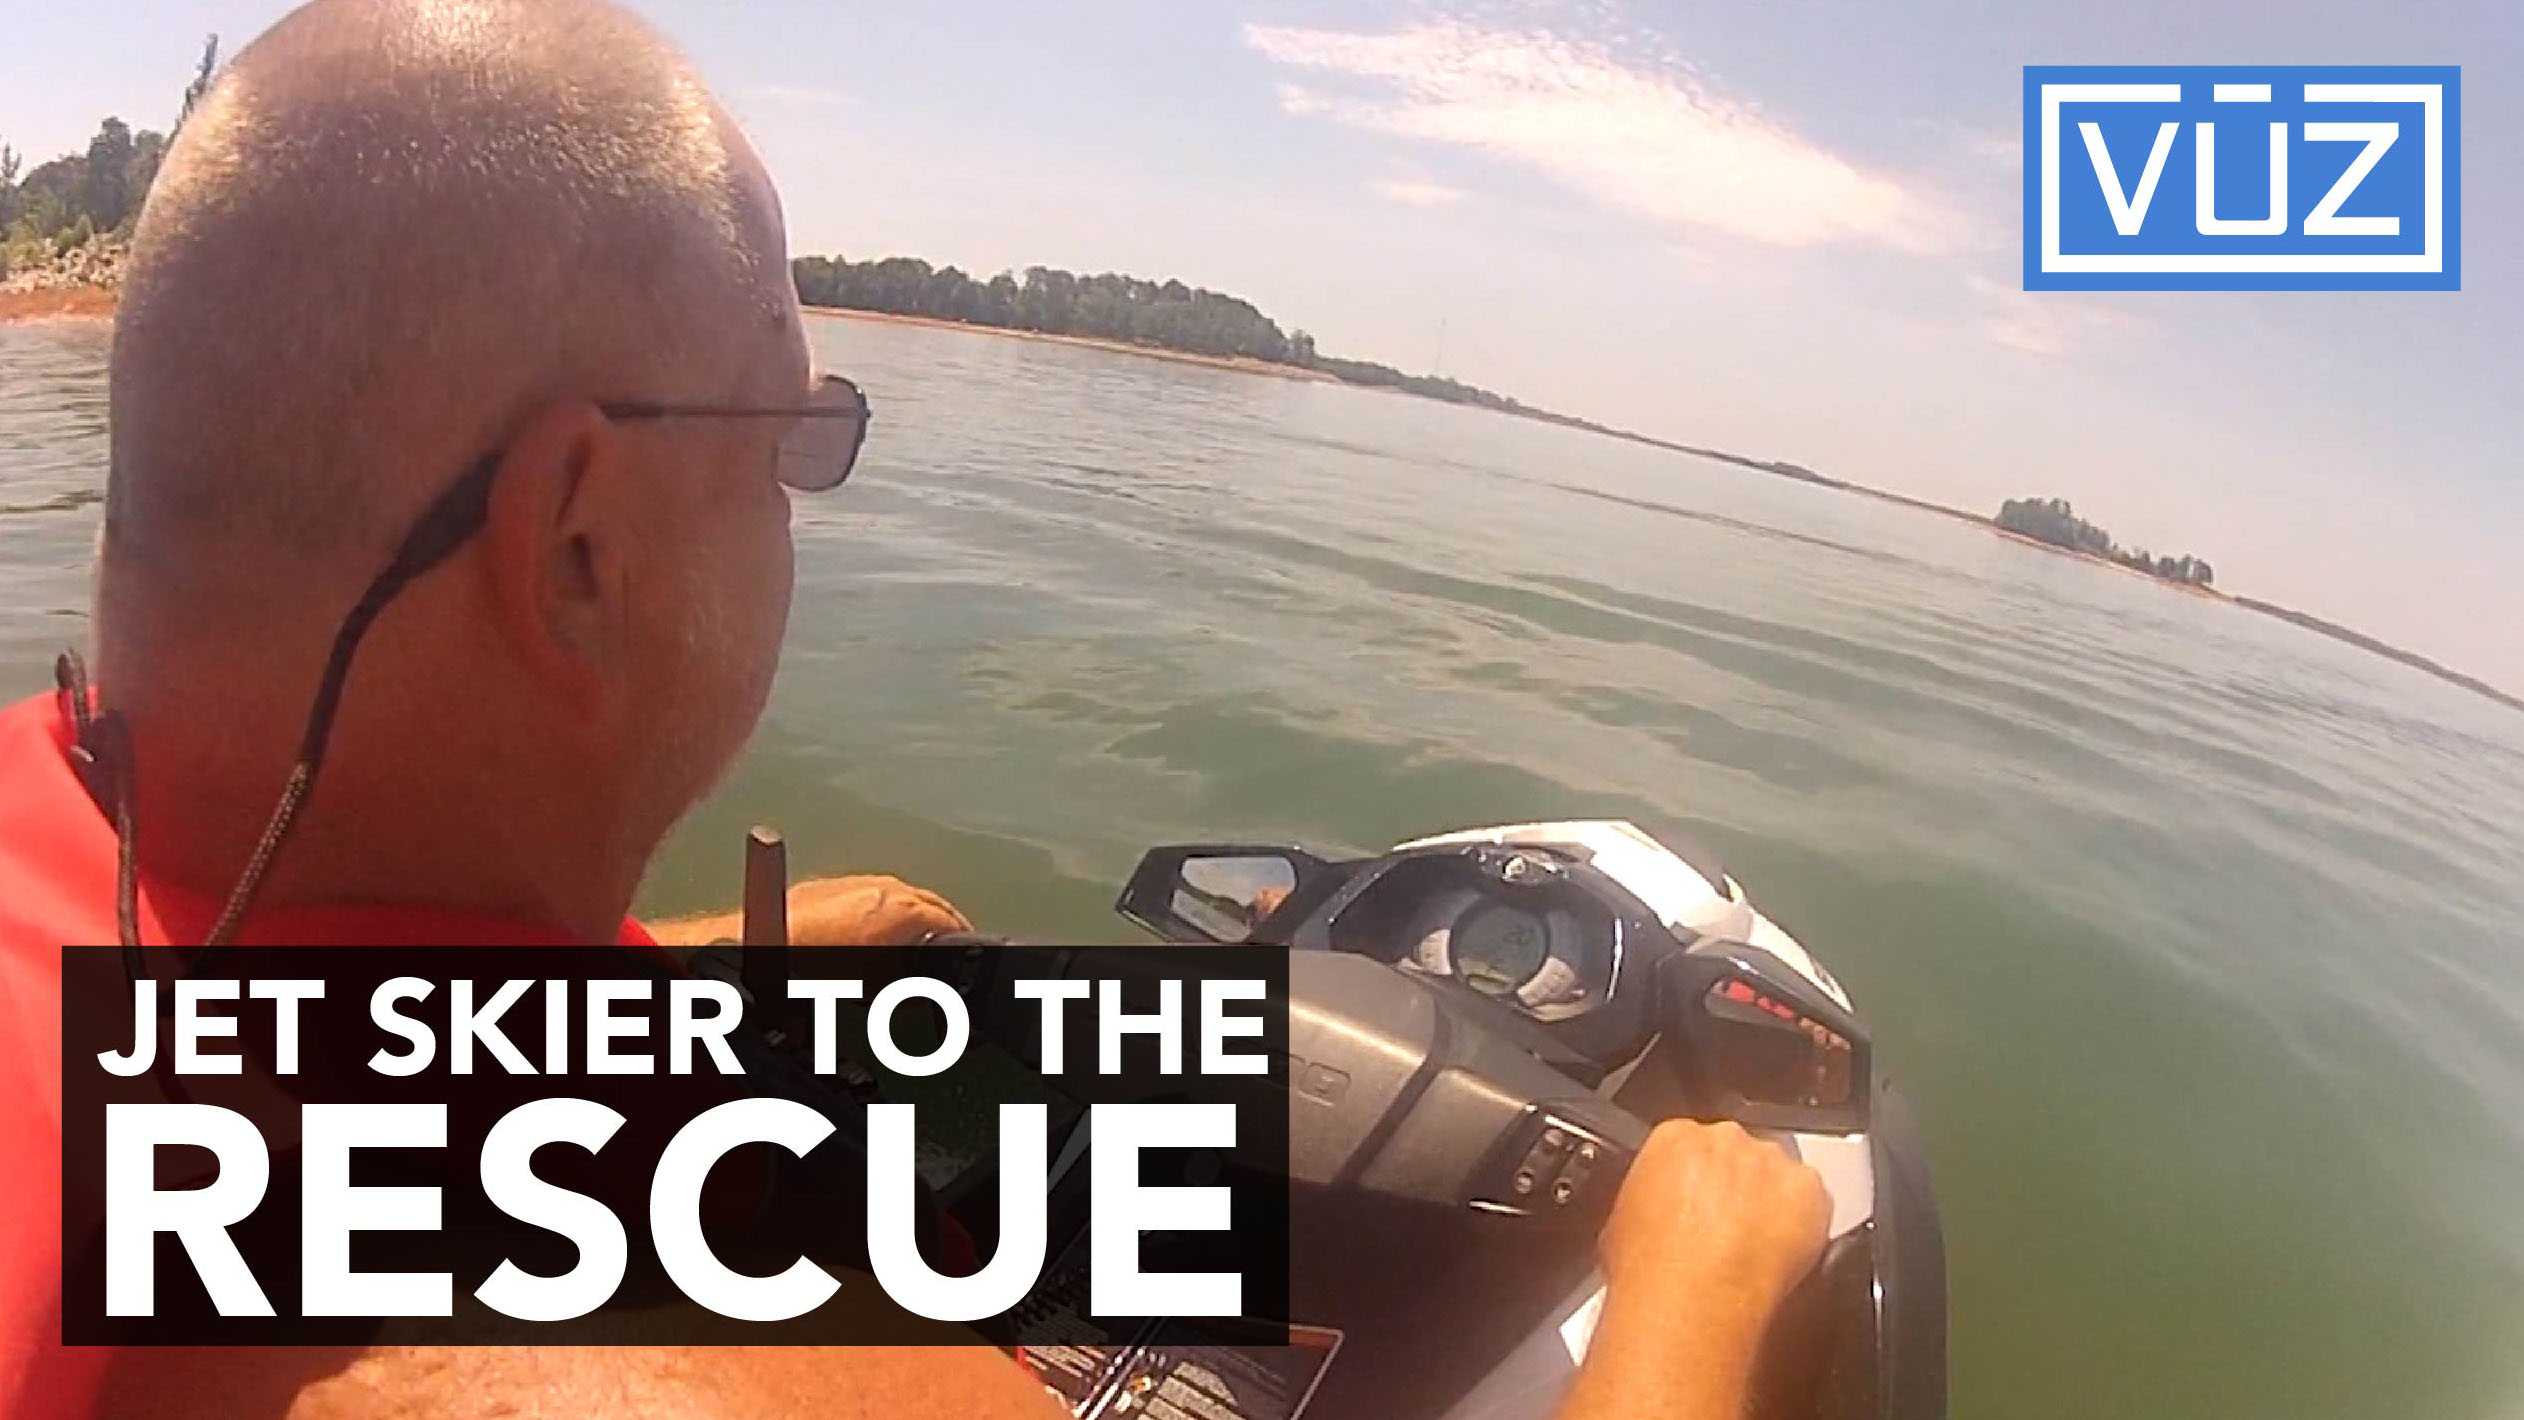 Girl's family meets jet skier who saved her life